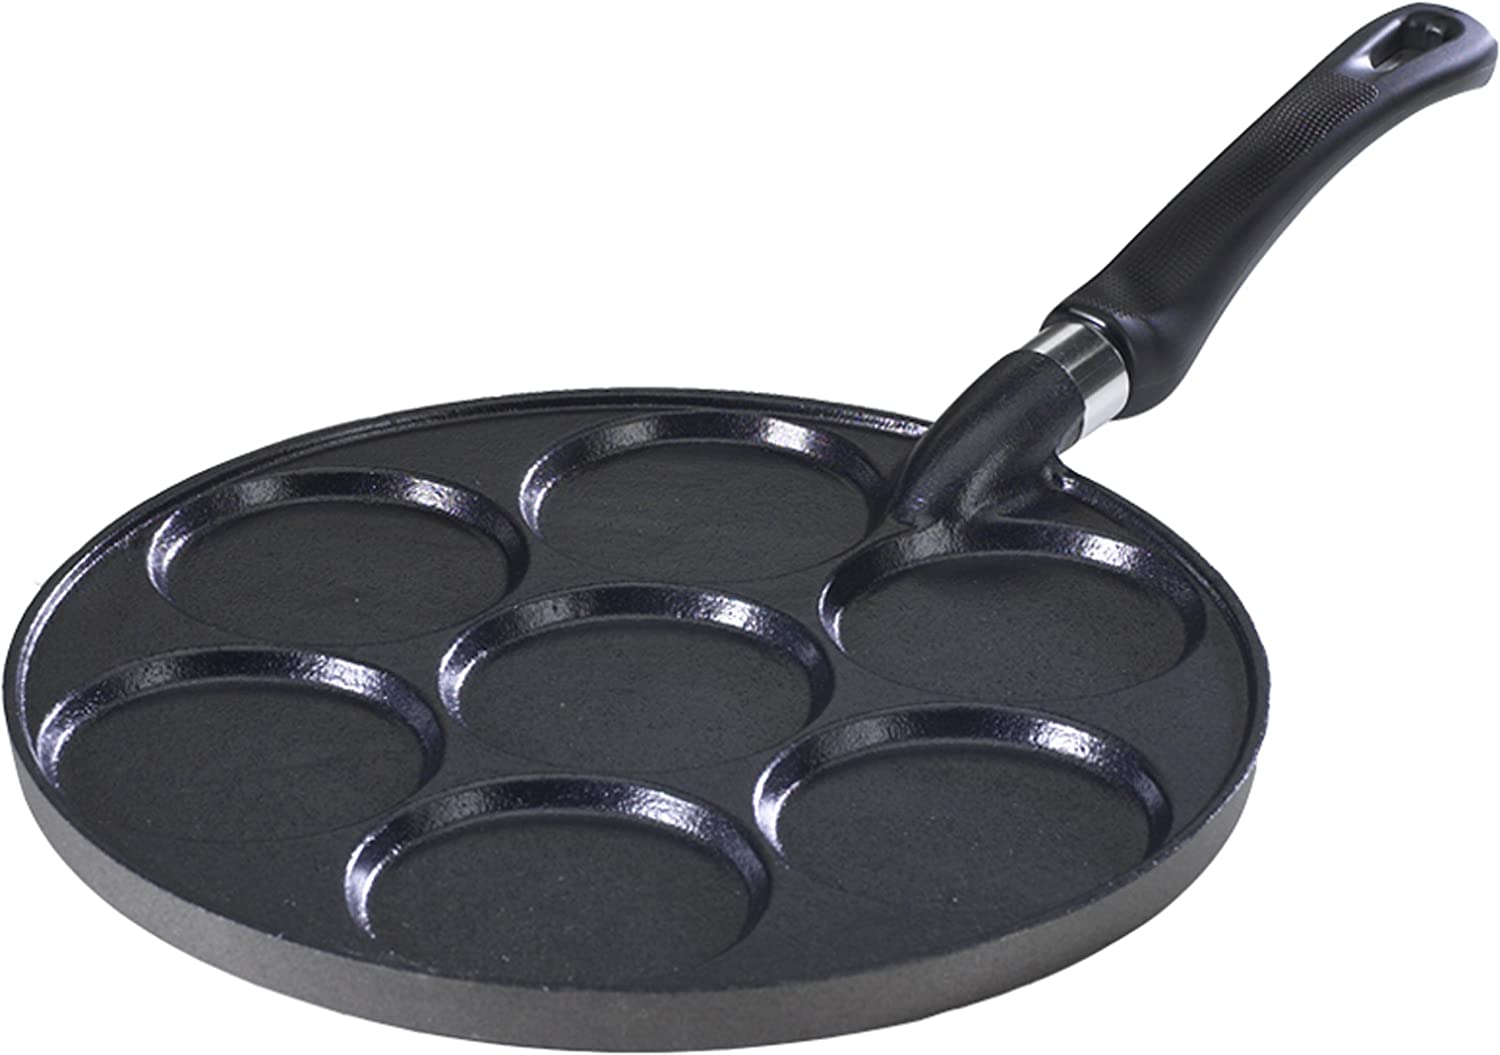 Best Pan For Pancakes